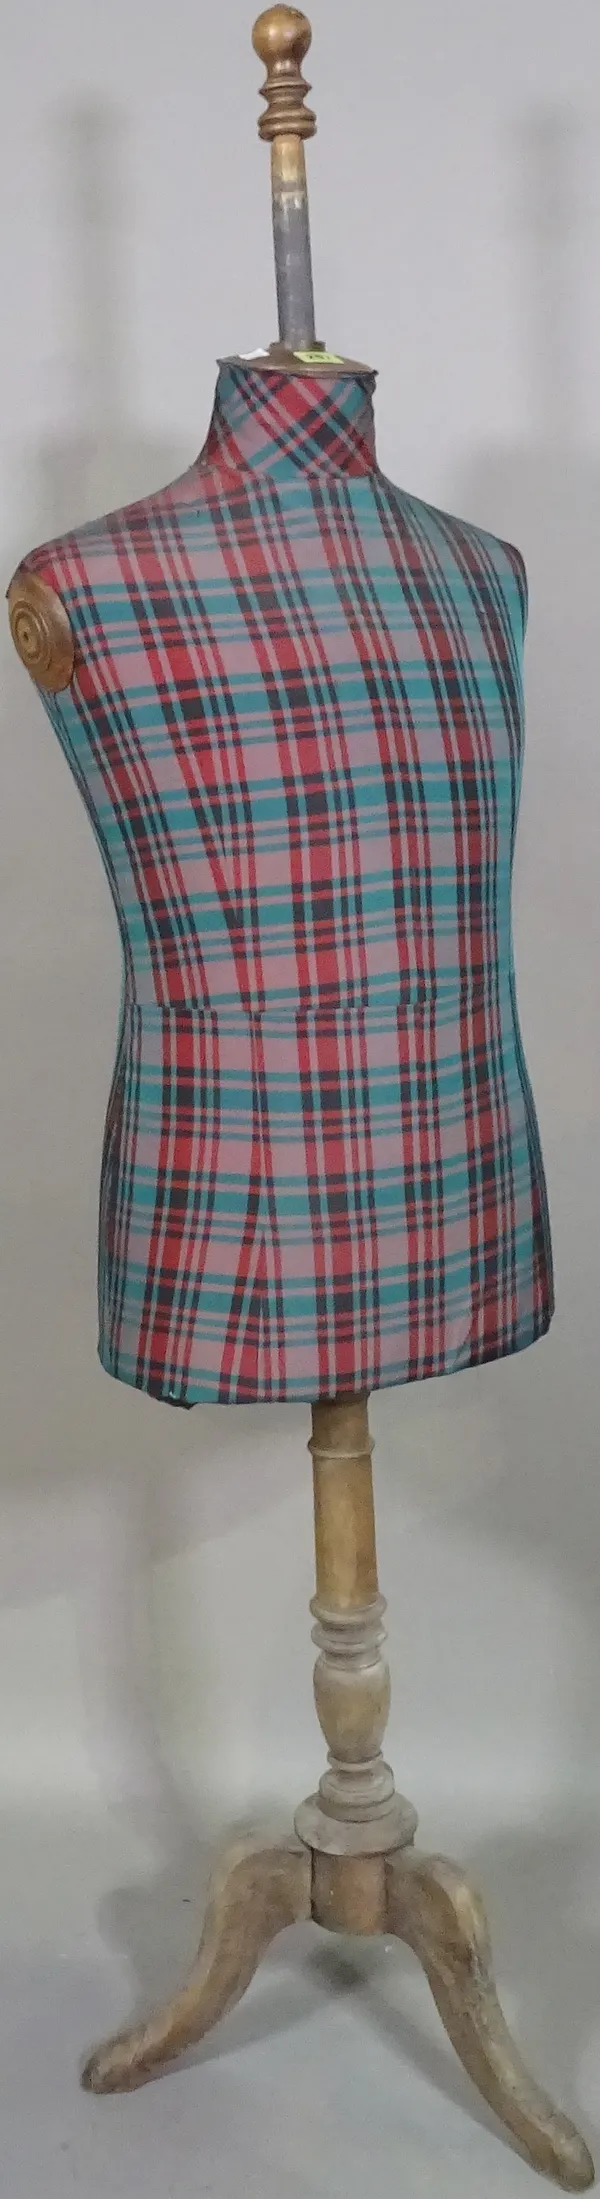 A green and red tartan dress makers mannequin, 158cm high.   H5